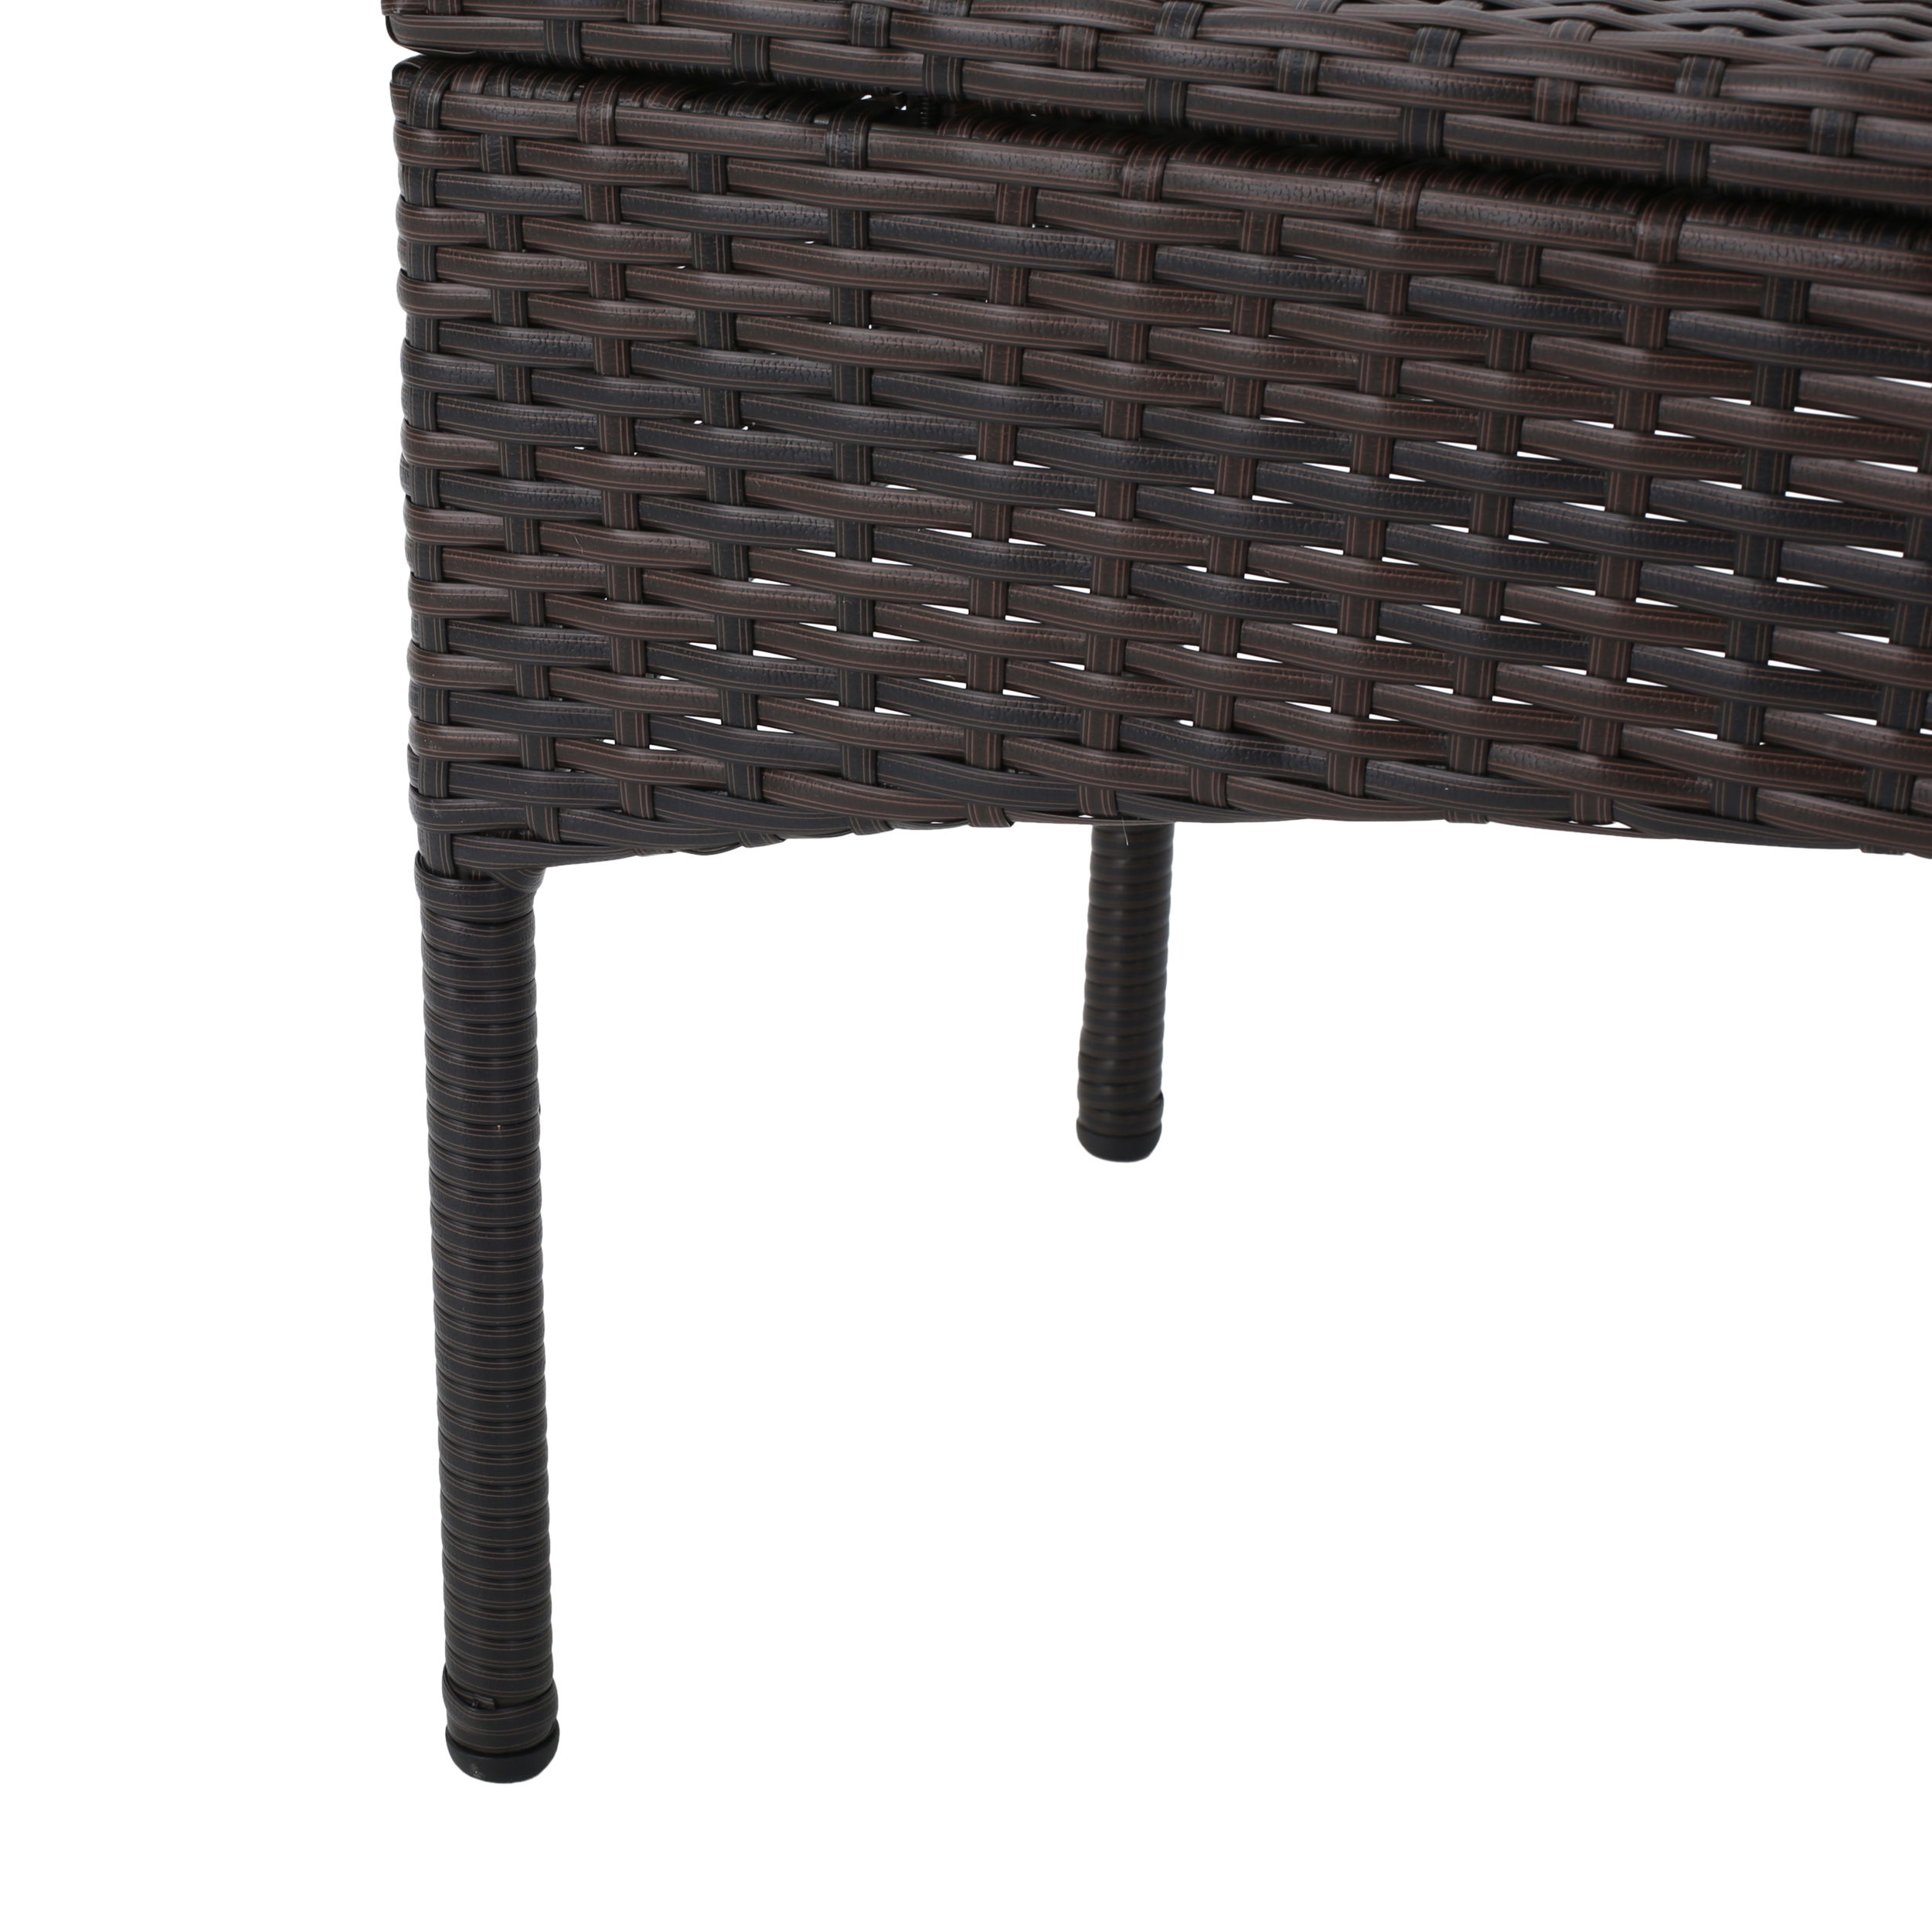 Fijian Outdoor 8 Seater Wicker Chat Set with Cushions, Multibrown and Dark Cream - image 3 of 10